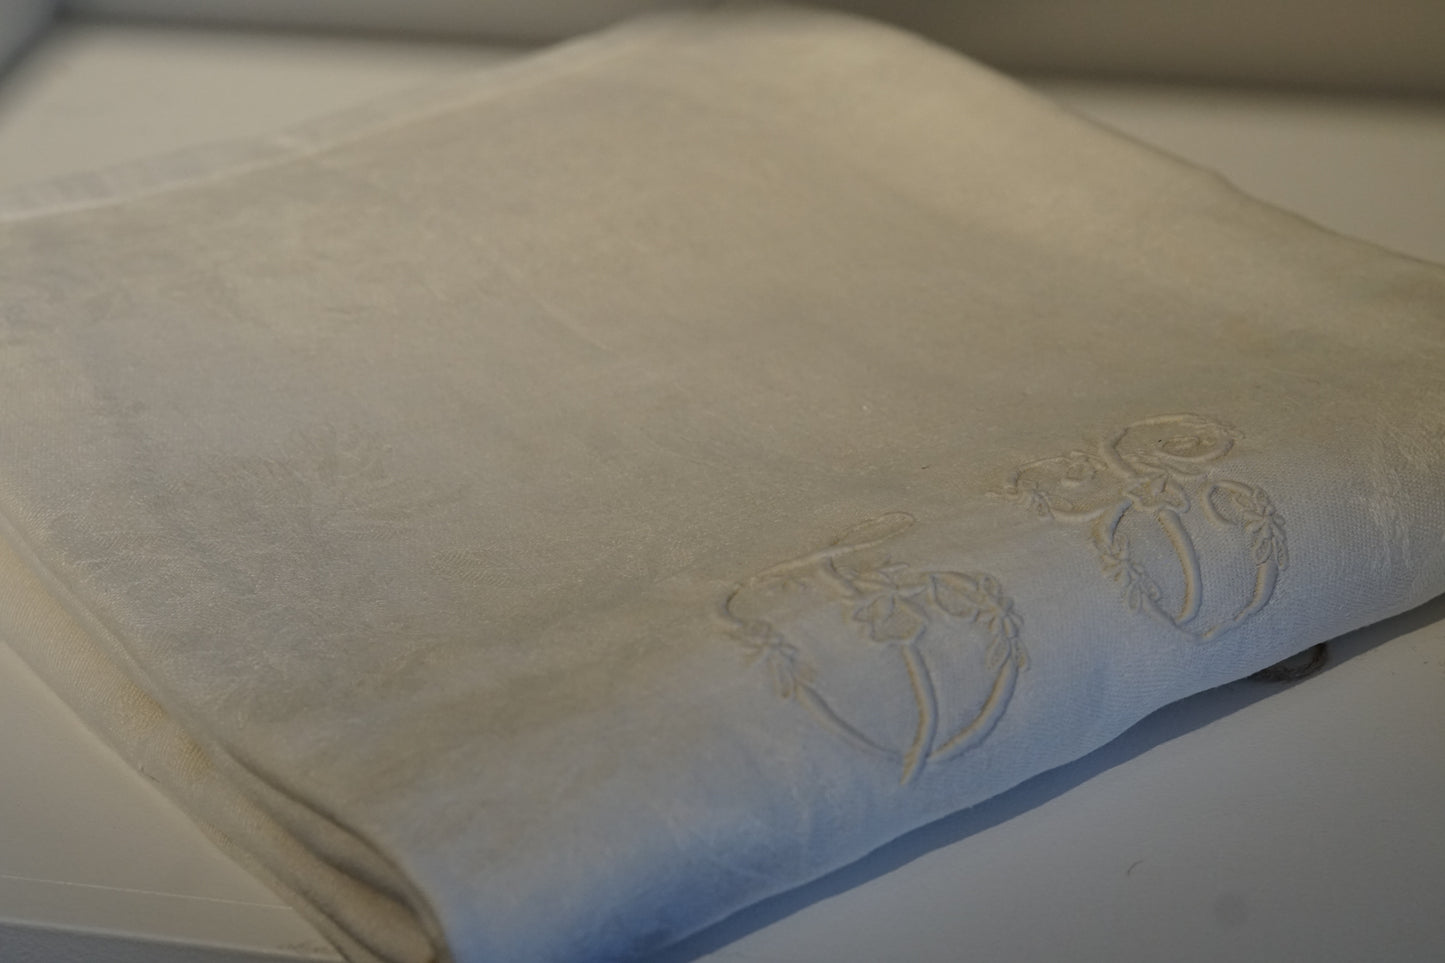 Set of 2 Standard Antique Linen "BD" Embroidered Pillow Cases